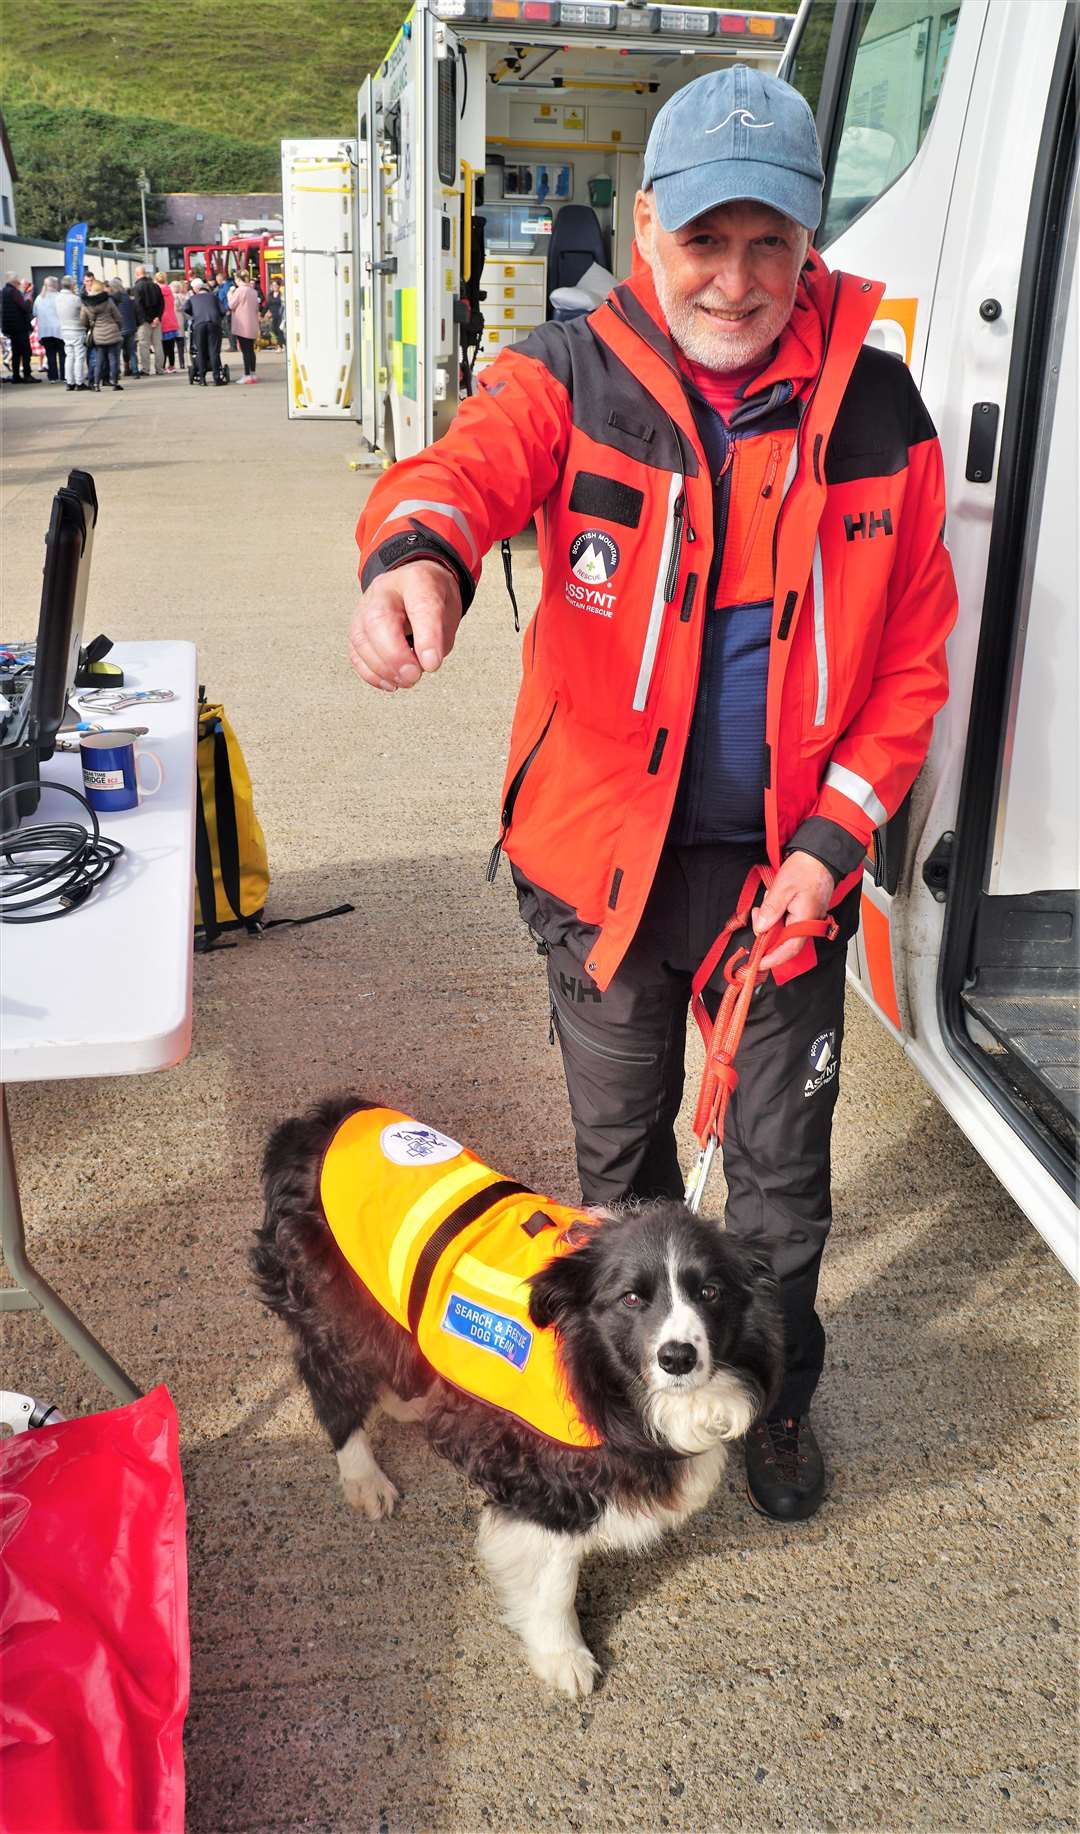 Molly the collie aided in mountain rescue missions and has recently retired said her handler Charlie MacLeod from Ulbster. Picture: DGS